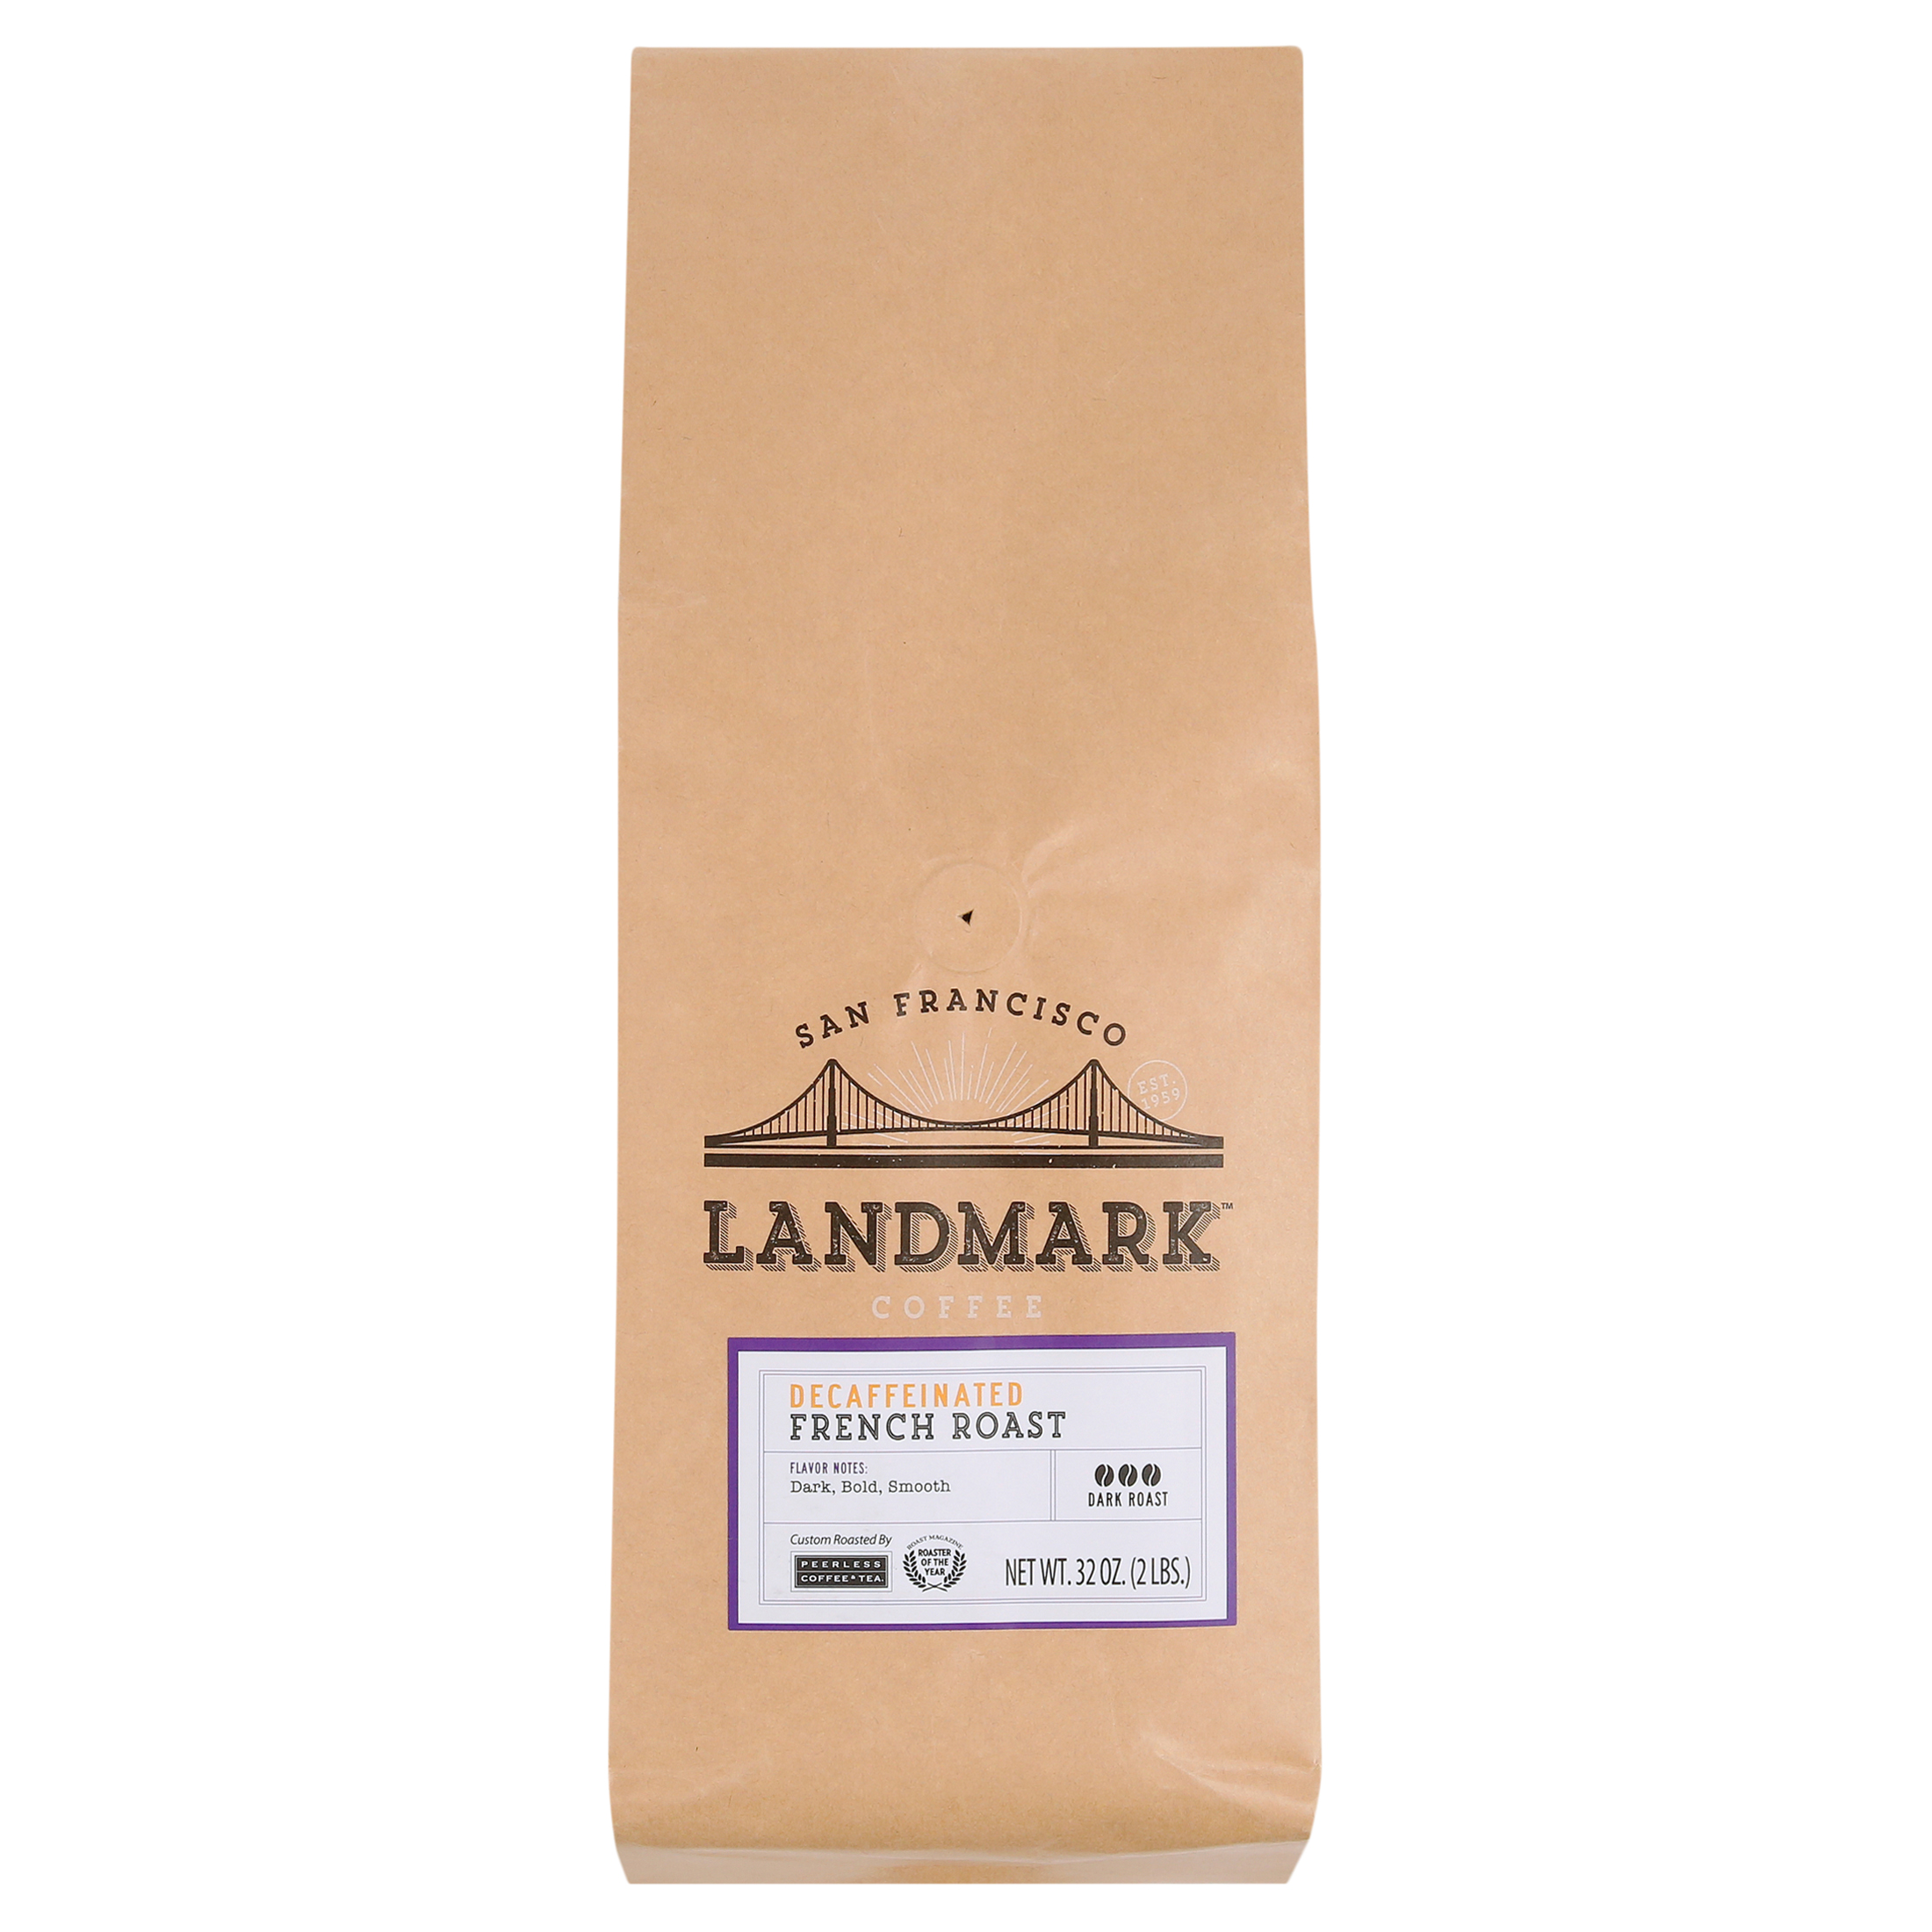 Land Mark Coffee Beans Decaf French Roast, 32.0 OZ - image 1 of 6